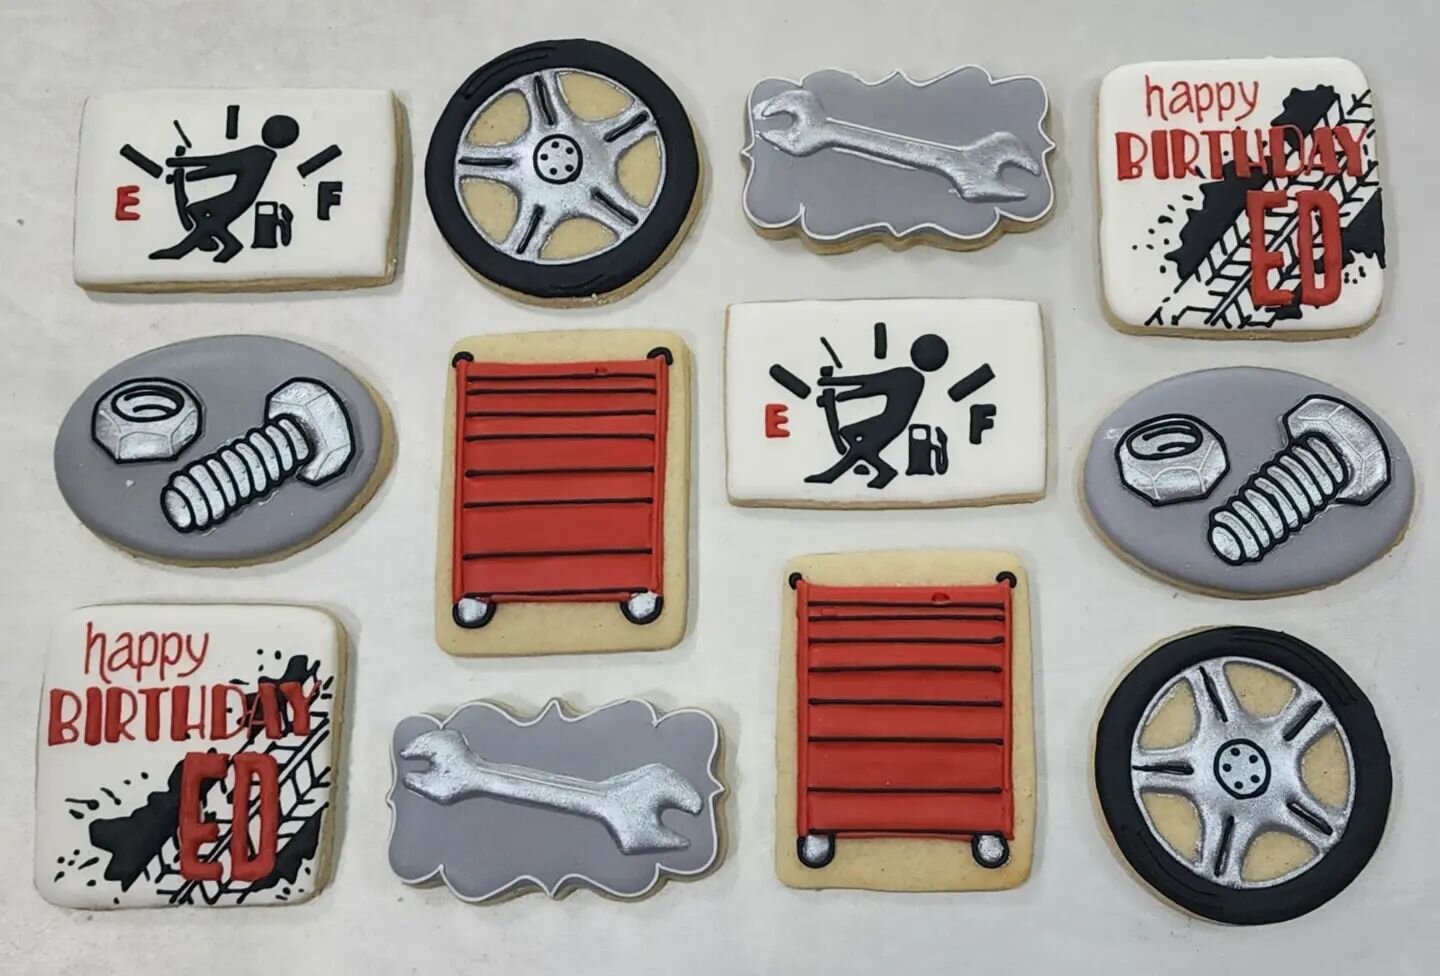 When it's your Birthday and you like to tinker with cars! 

Hope your day was amazing! 

#mechanic #cars #tools #mrfixit #airdriemoms #manlymen #calgarycookies #yyctoday #mondaymotivation #carstairs #crossfield #didsbury #Olds #reddeer #cookiesofinst